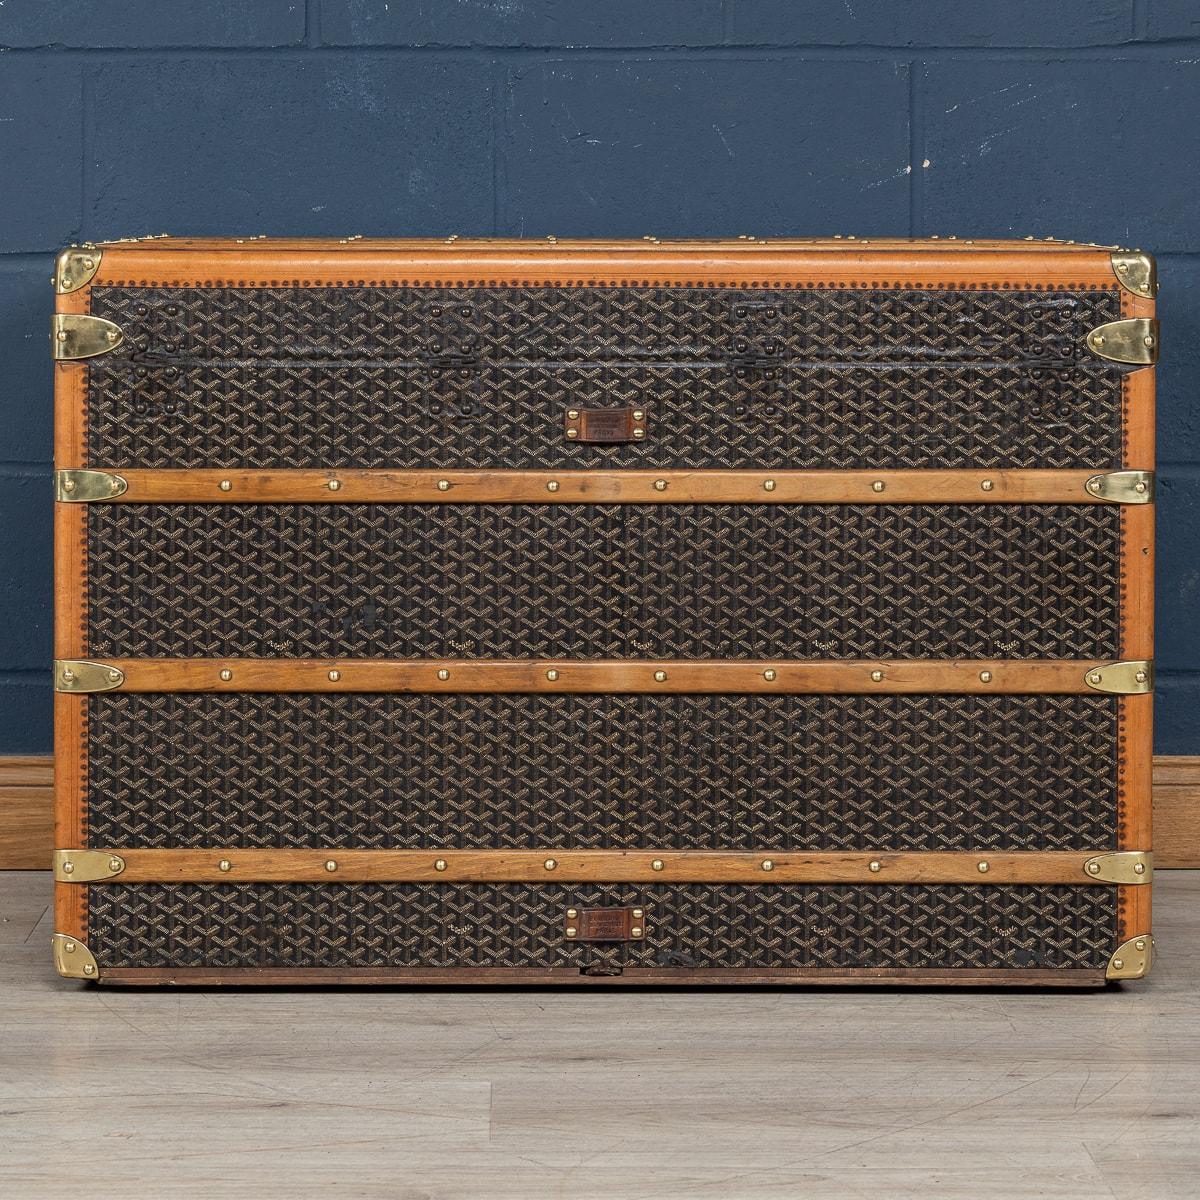 French Antique 20th Century Goyard Courier Trunk In Chevron Canvas, France c.1900 For Sale